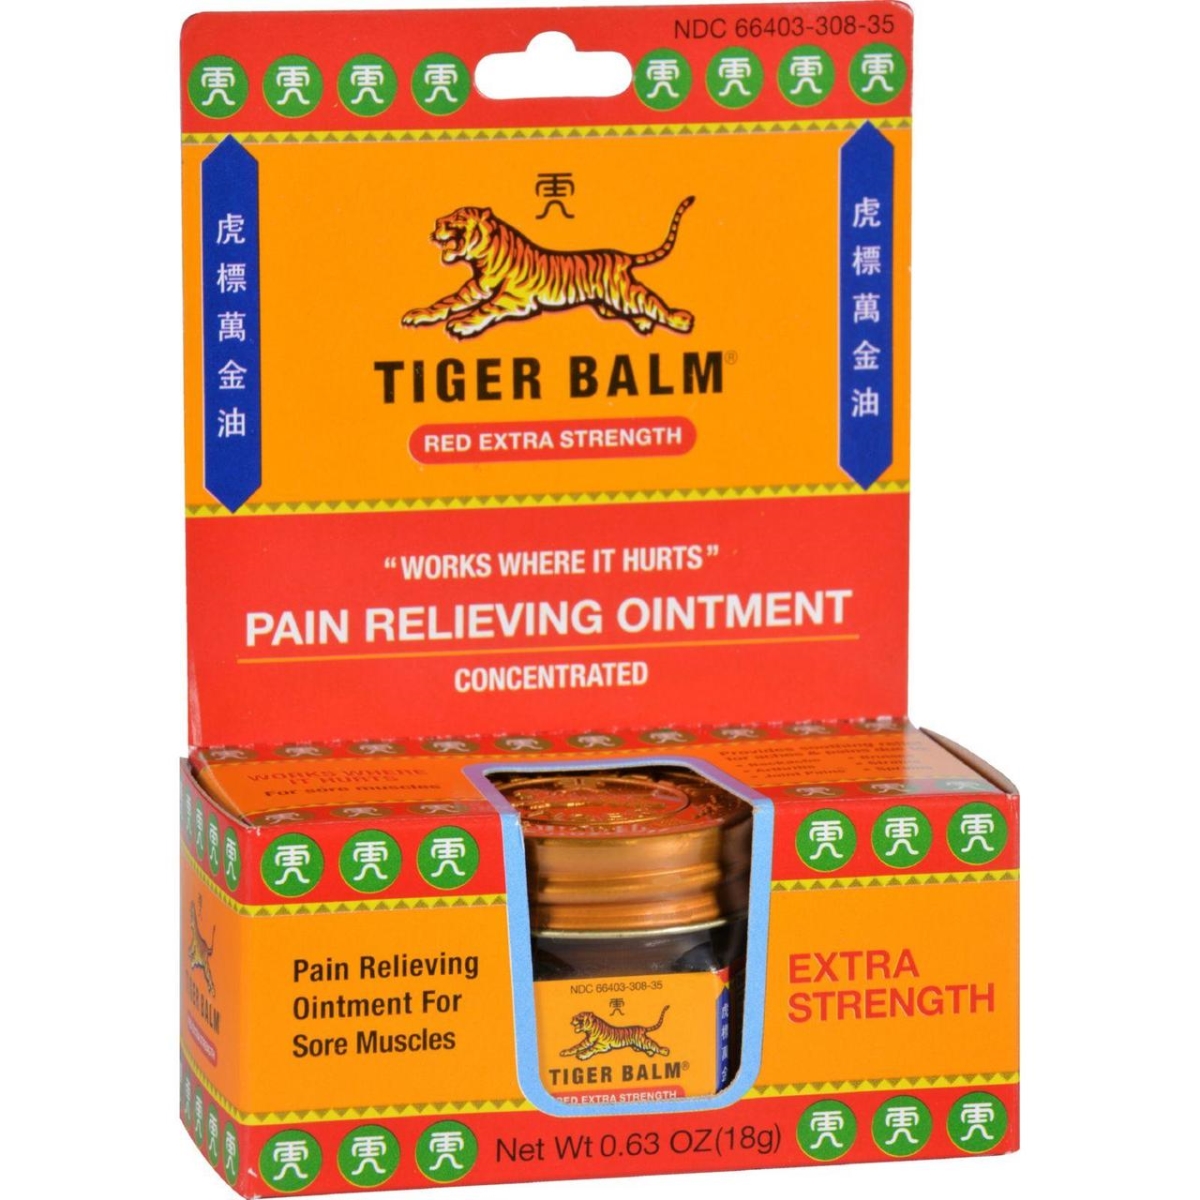 Hg0876557 0.63 Oz Extra Strength Pain Relieving Ointment - Case Of 6